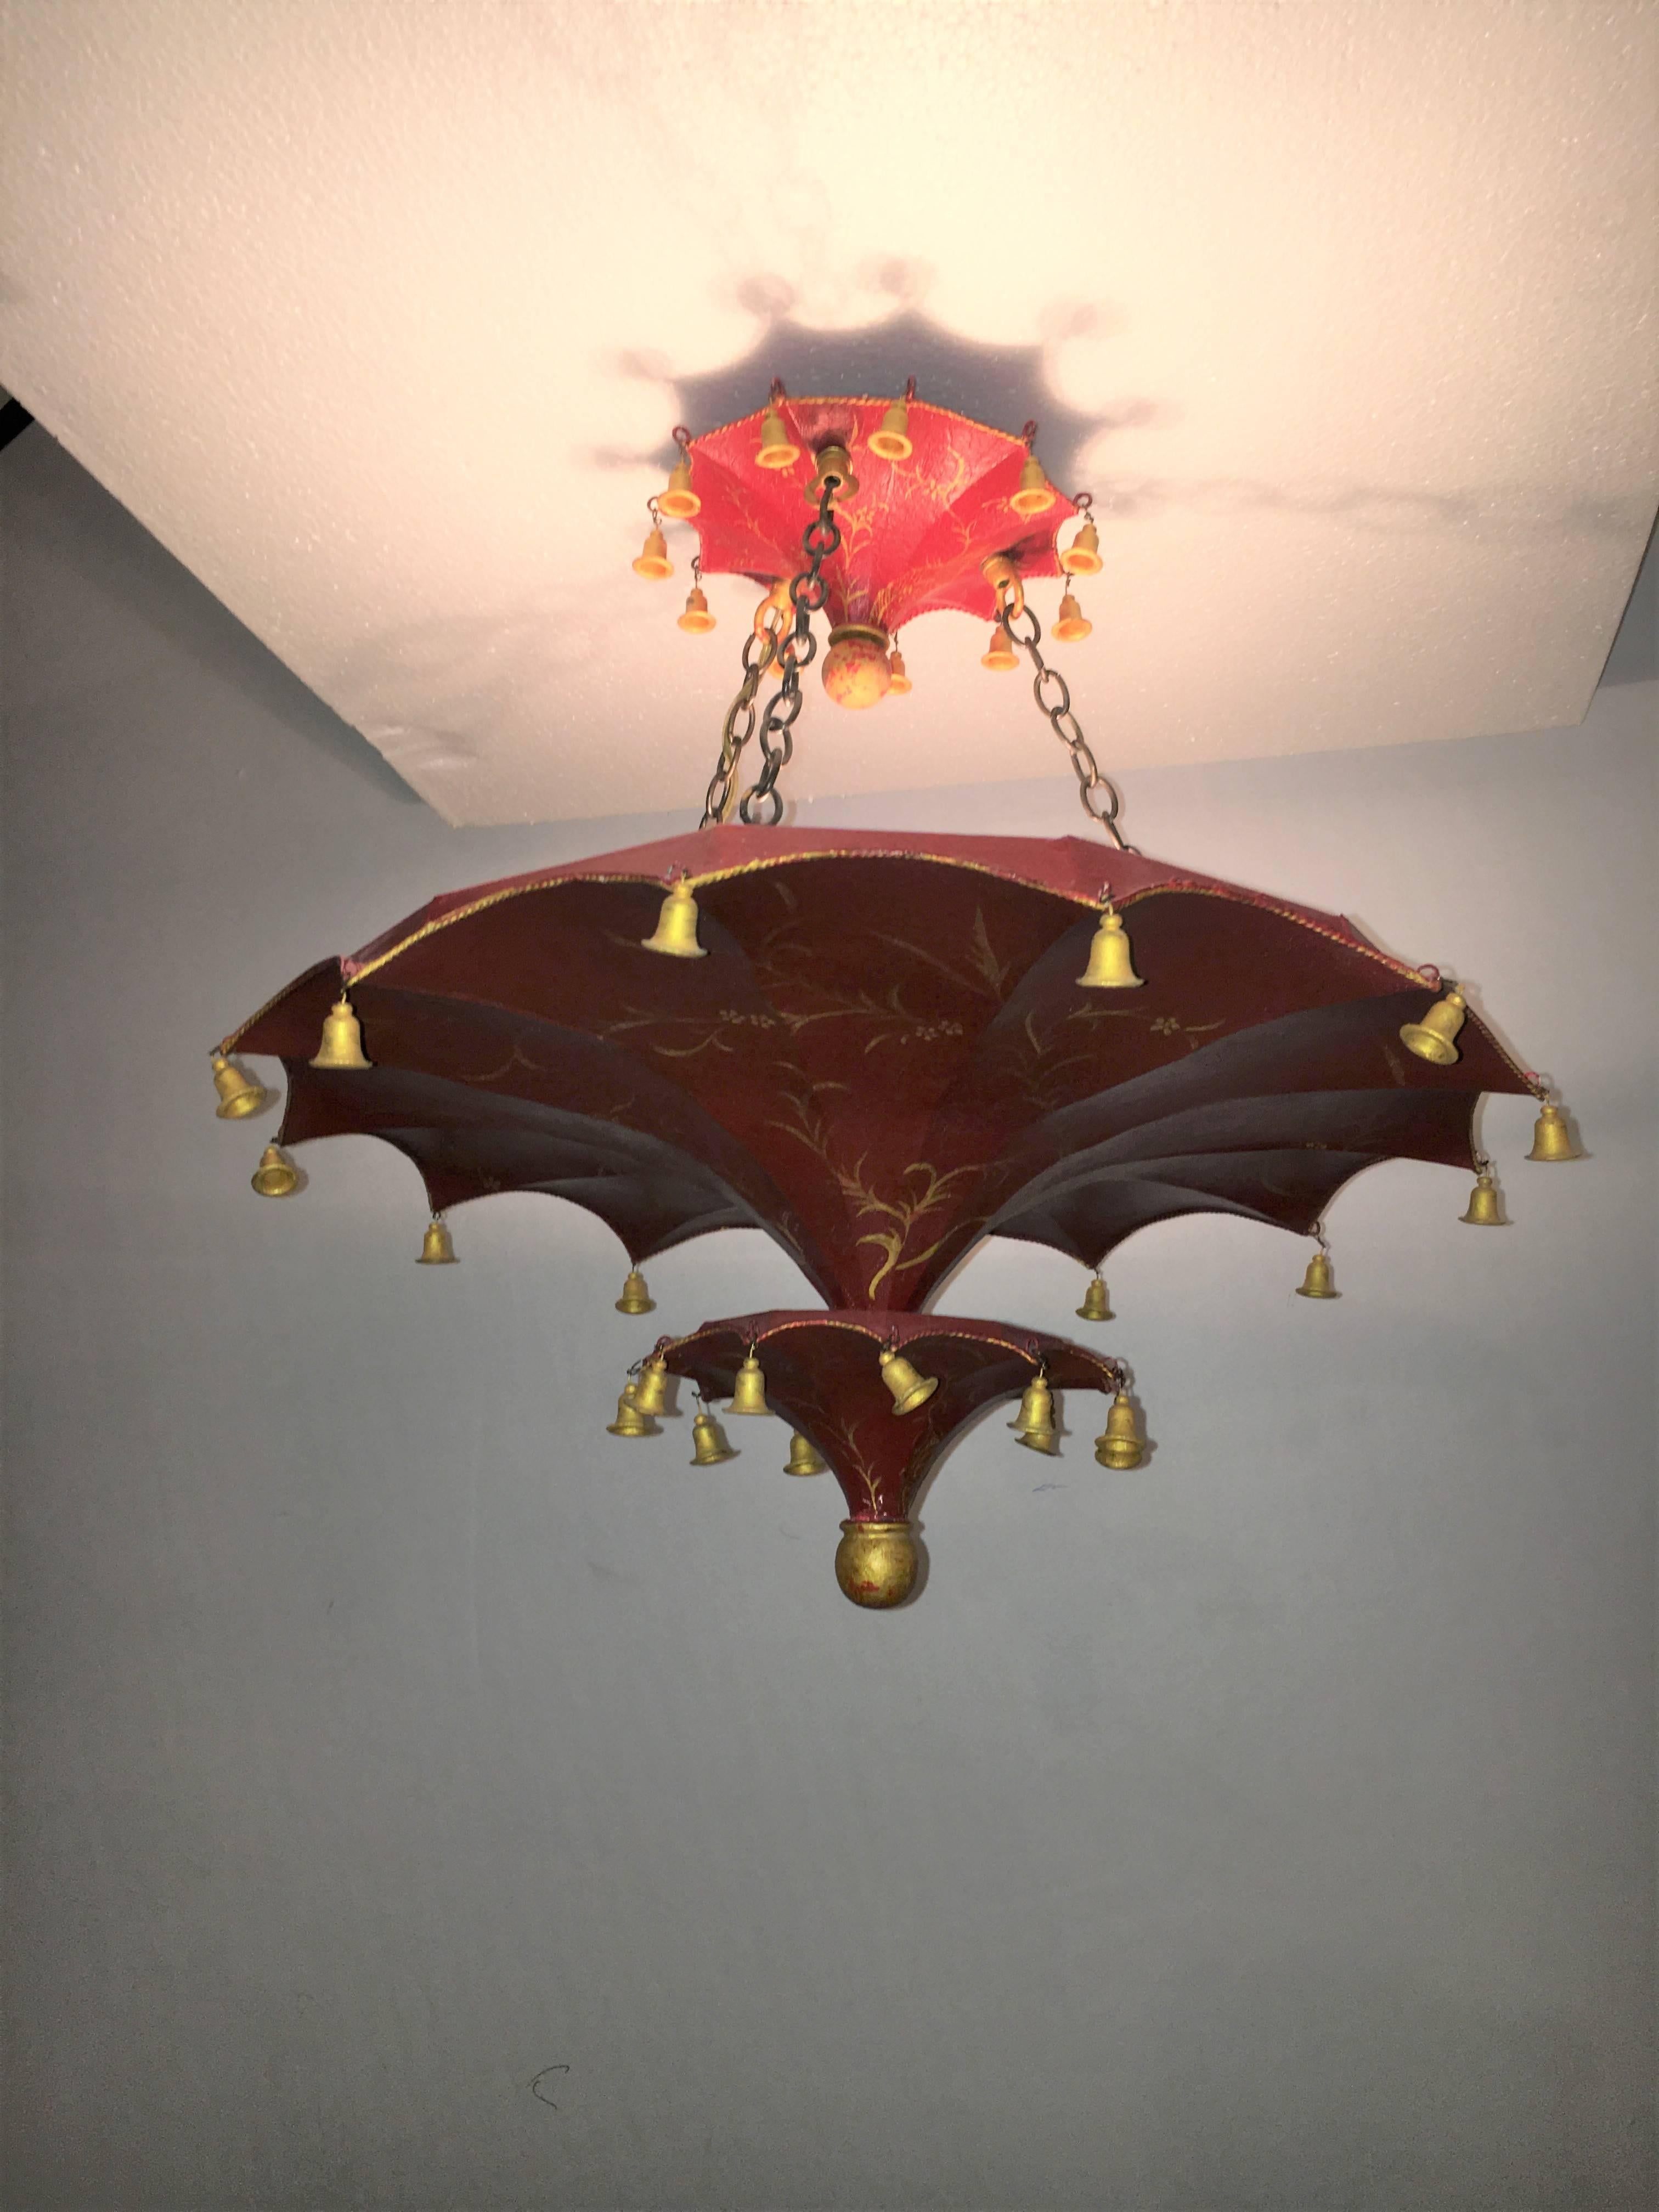 Wired with three interior lights this ceiling mount chandelier has a fire red finish and can either mount directly to the ceiling or hang on a chain. The upper
canopy and lower umbrella form decorated with flowing design. The gilt gold bells that